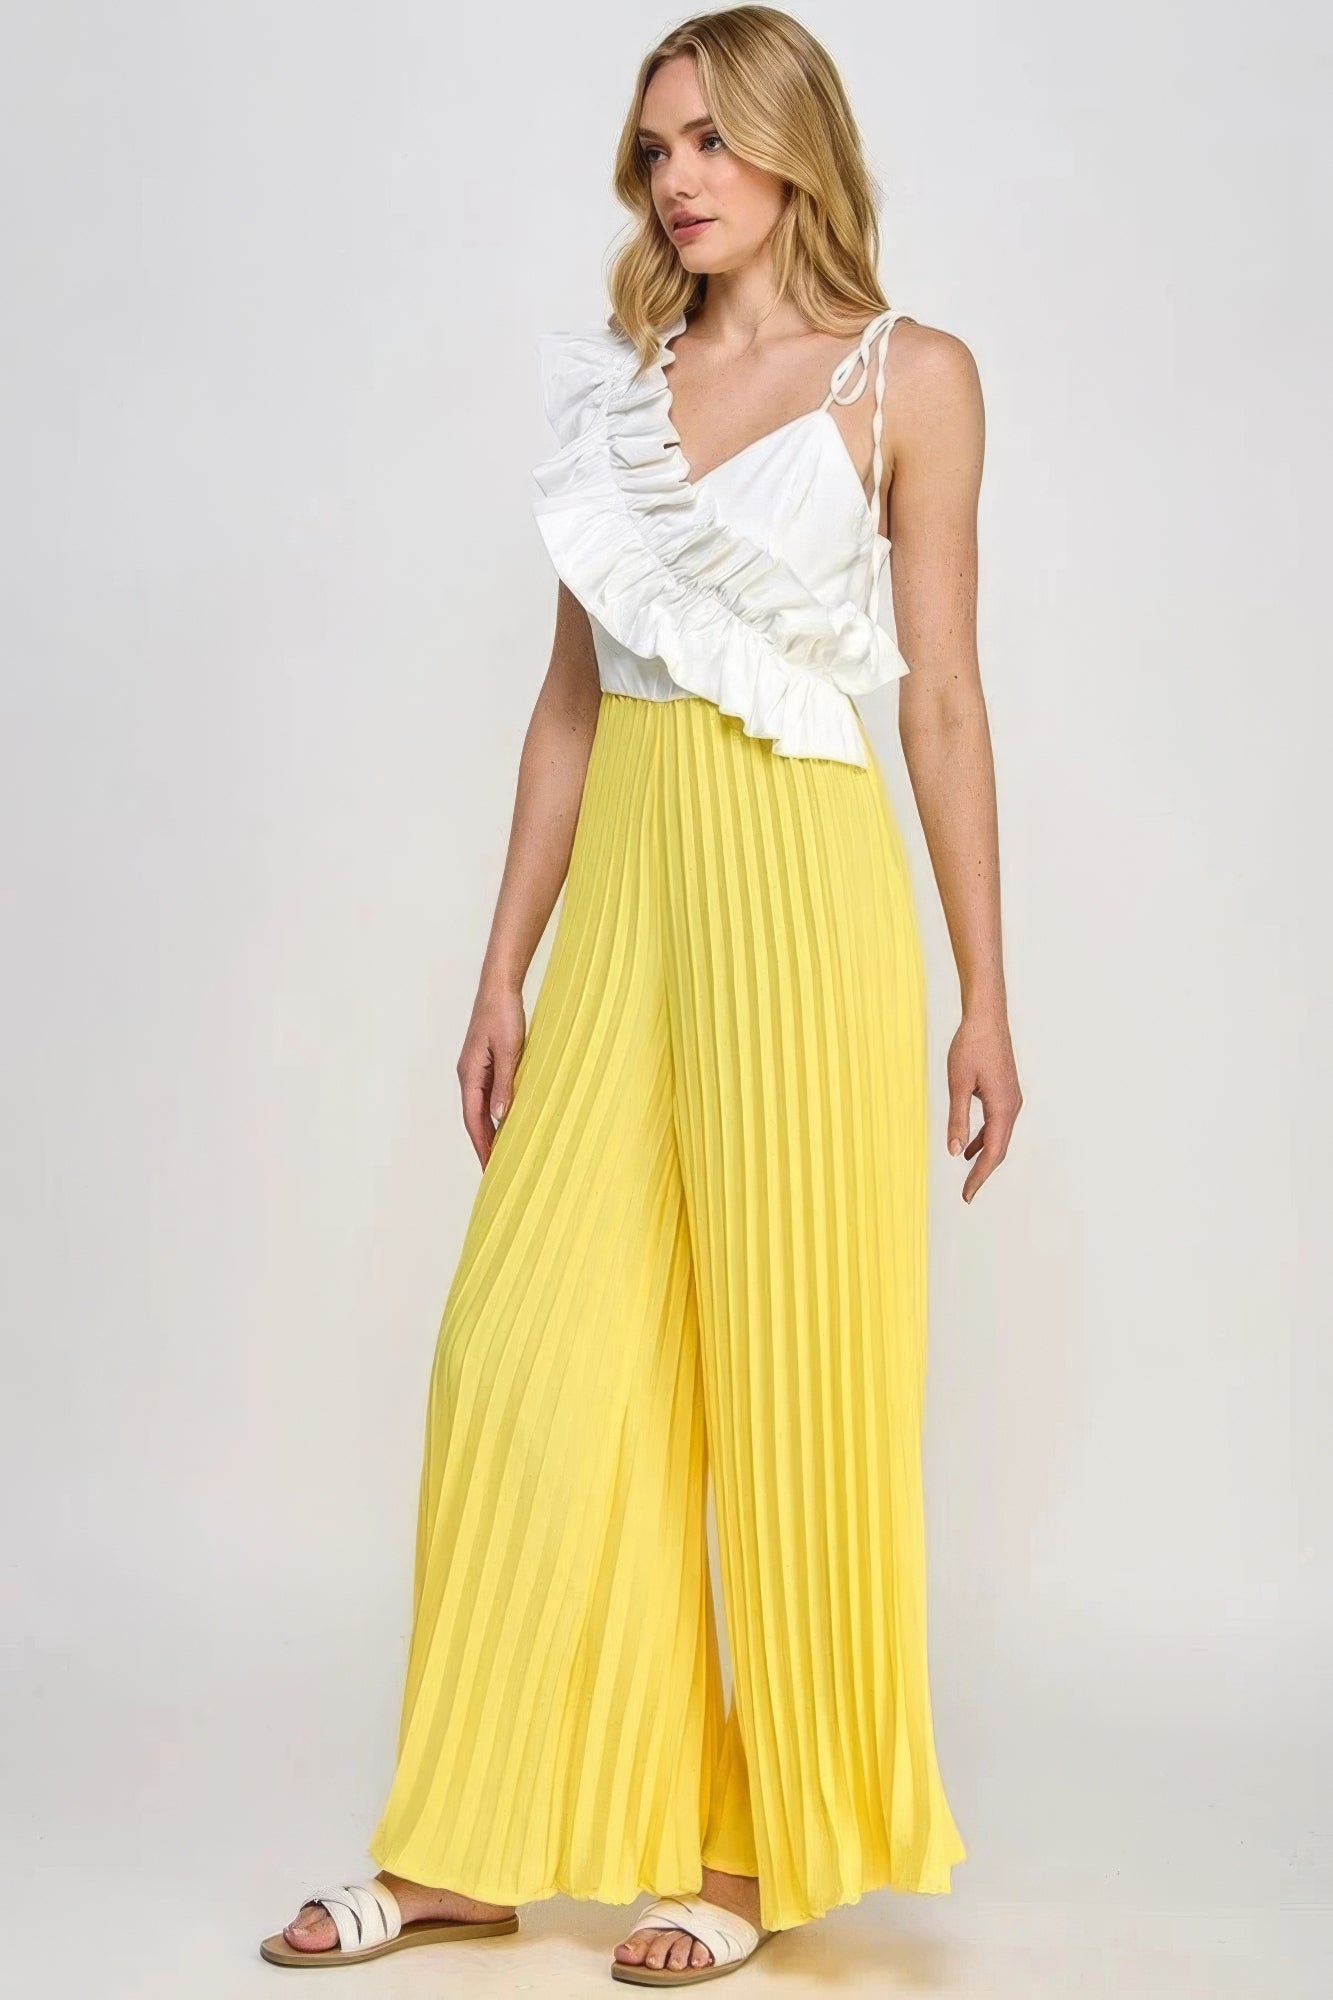 Asymmetrical Ruffle Jumpsuit: Pleated Bottom, Cami Style - Vibrant Yellow/Off White